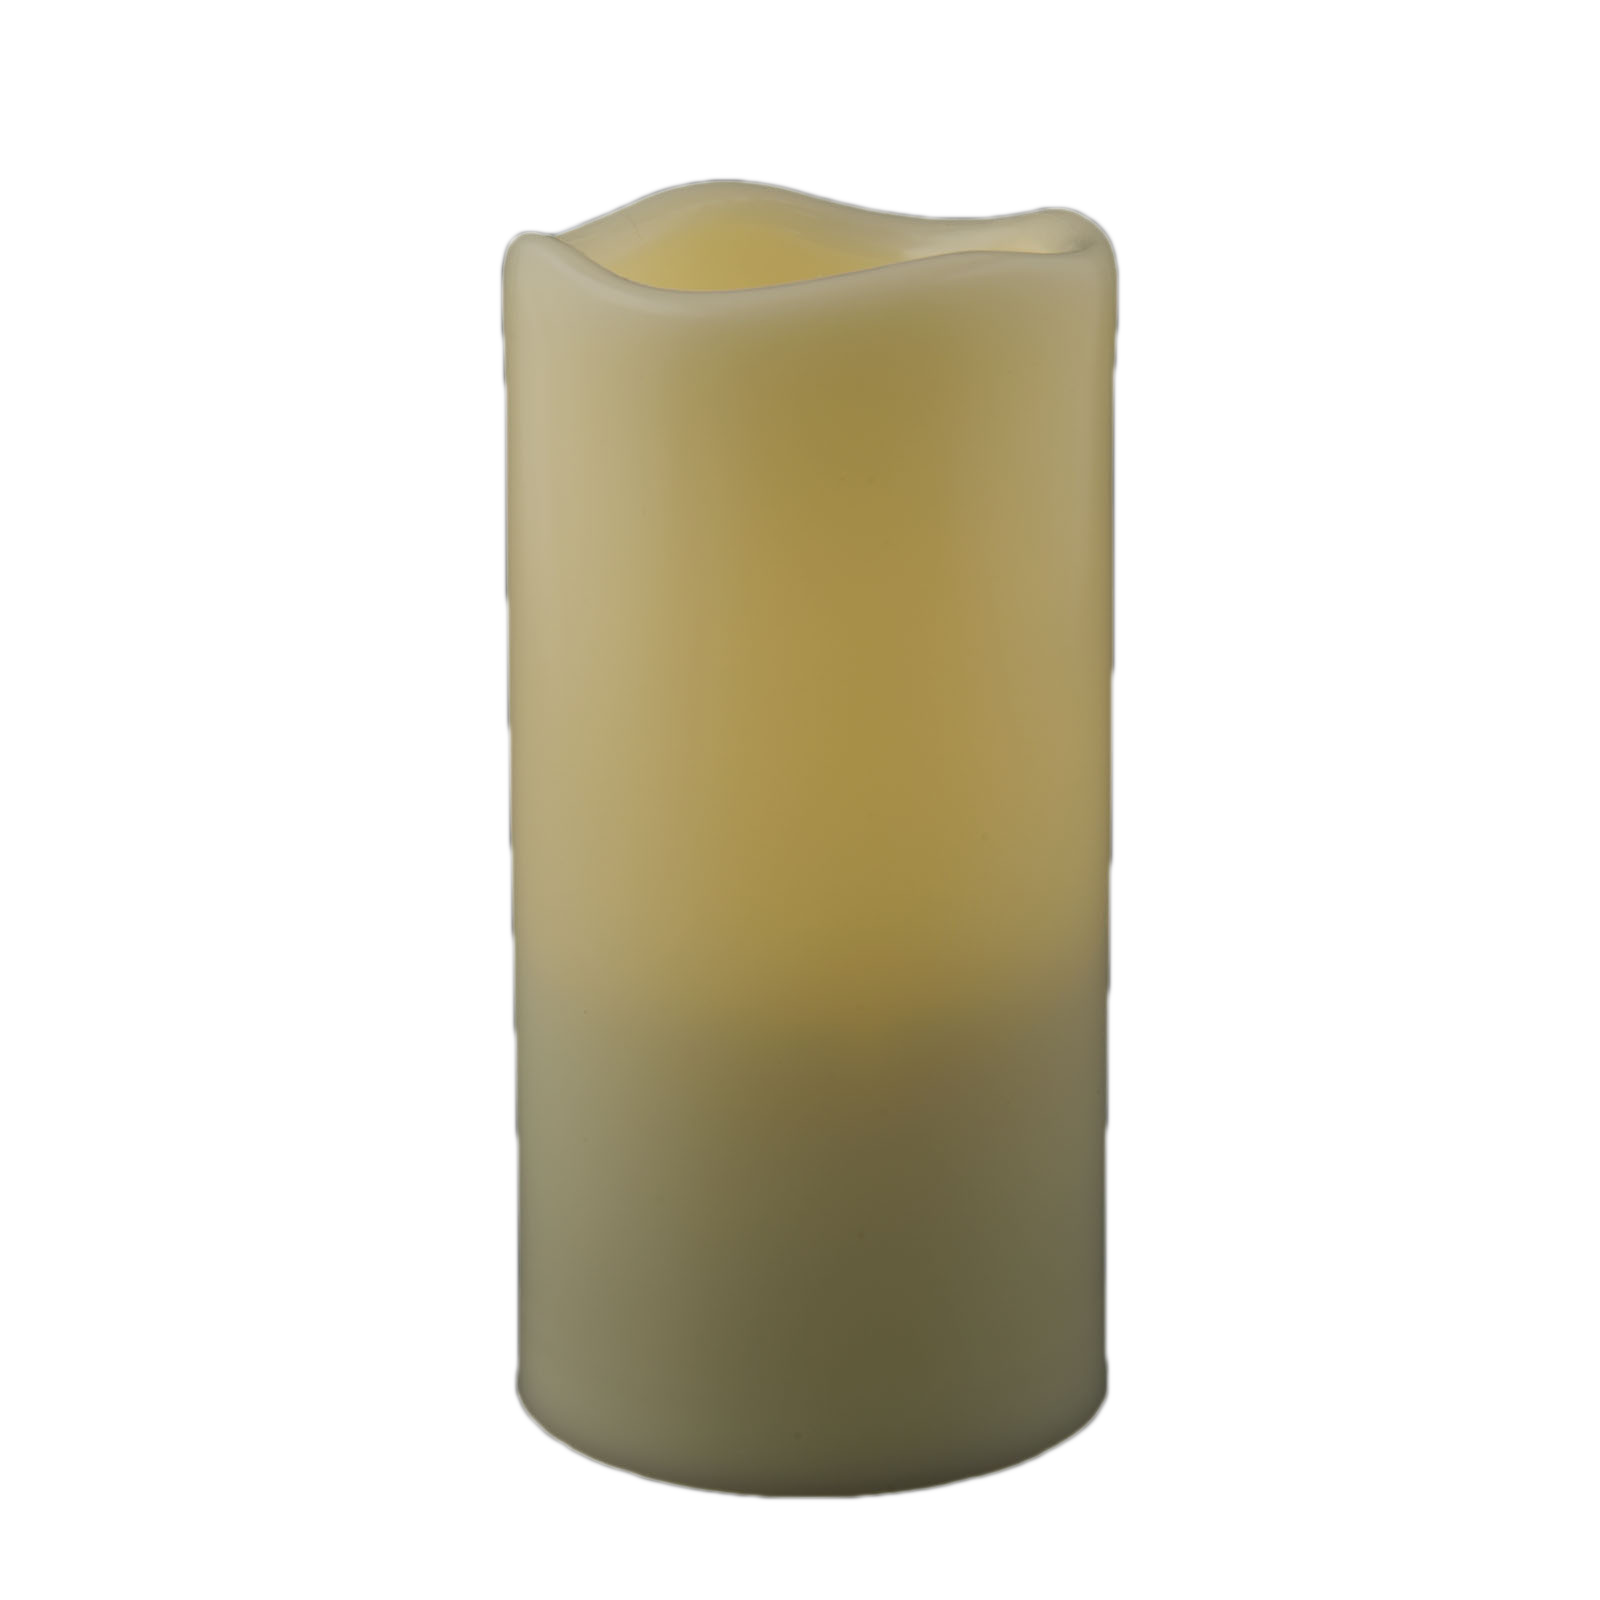 Resin Flameless 3 x 5.75 Pillar Candle With Melted Top